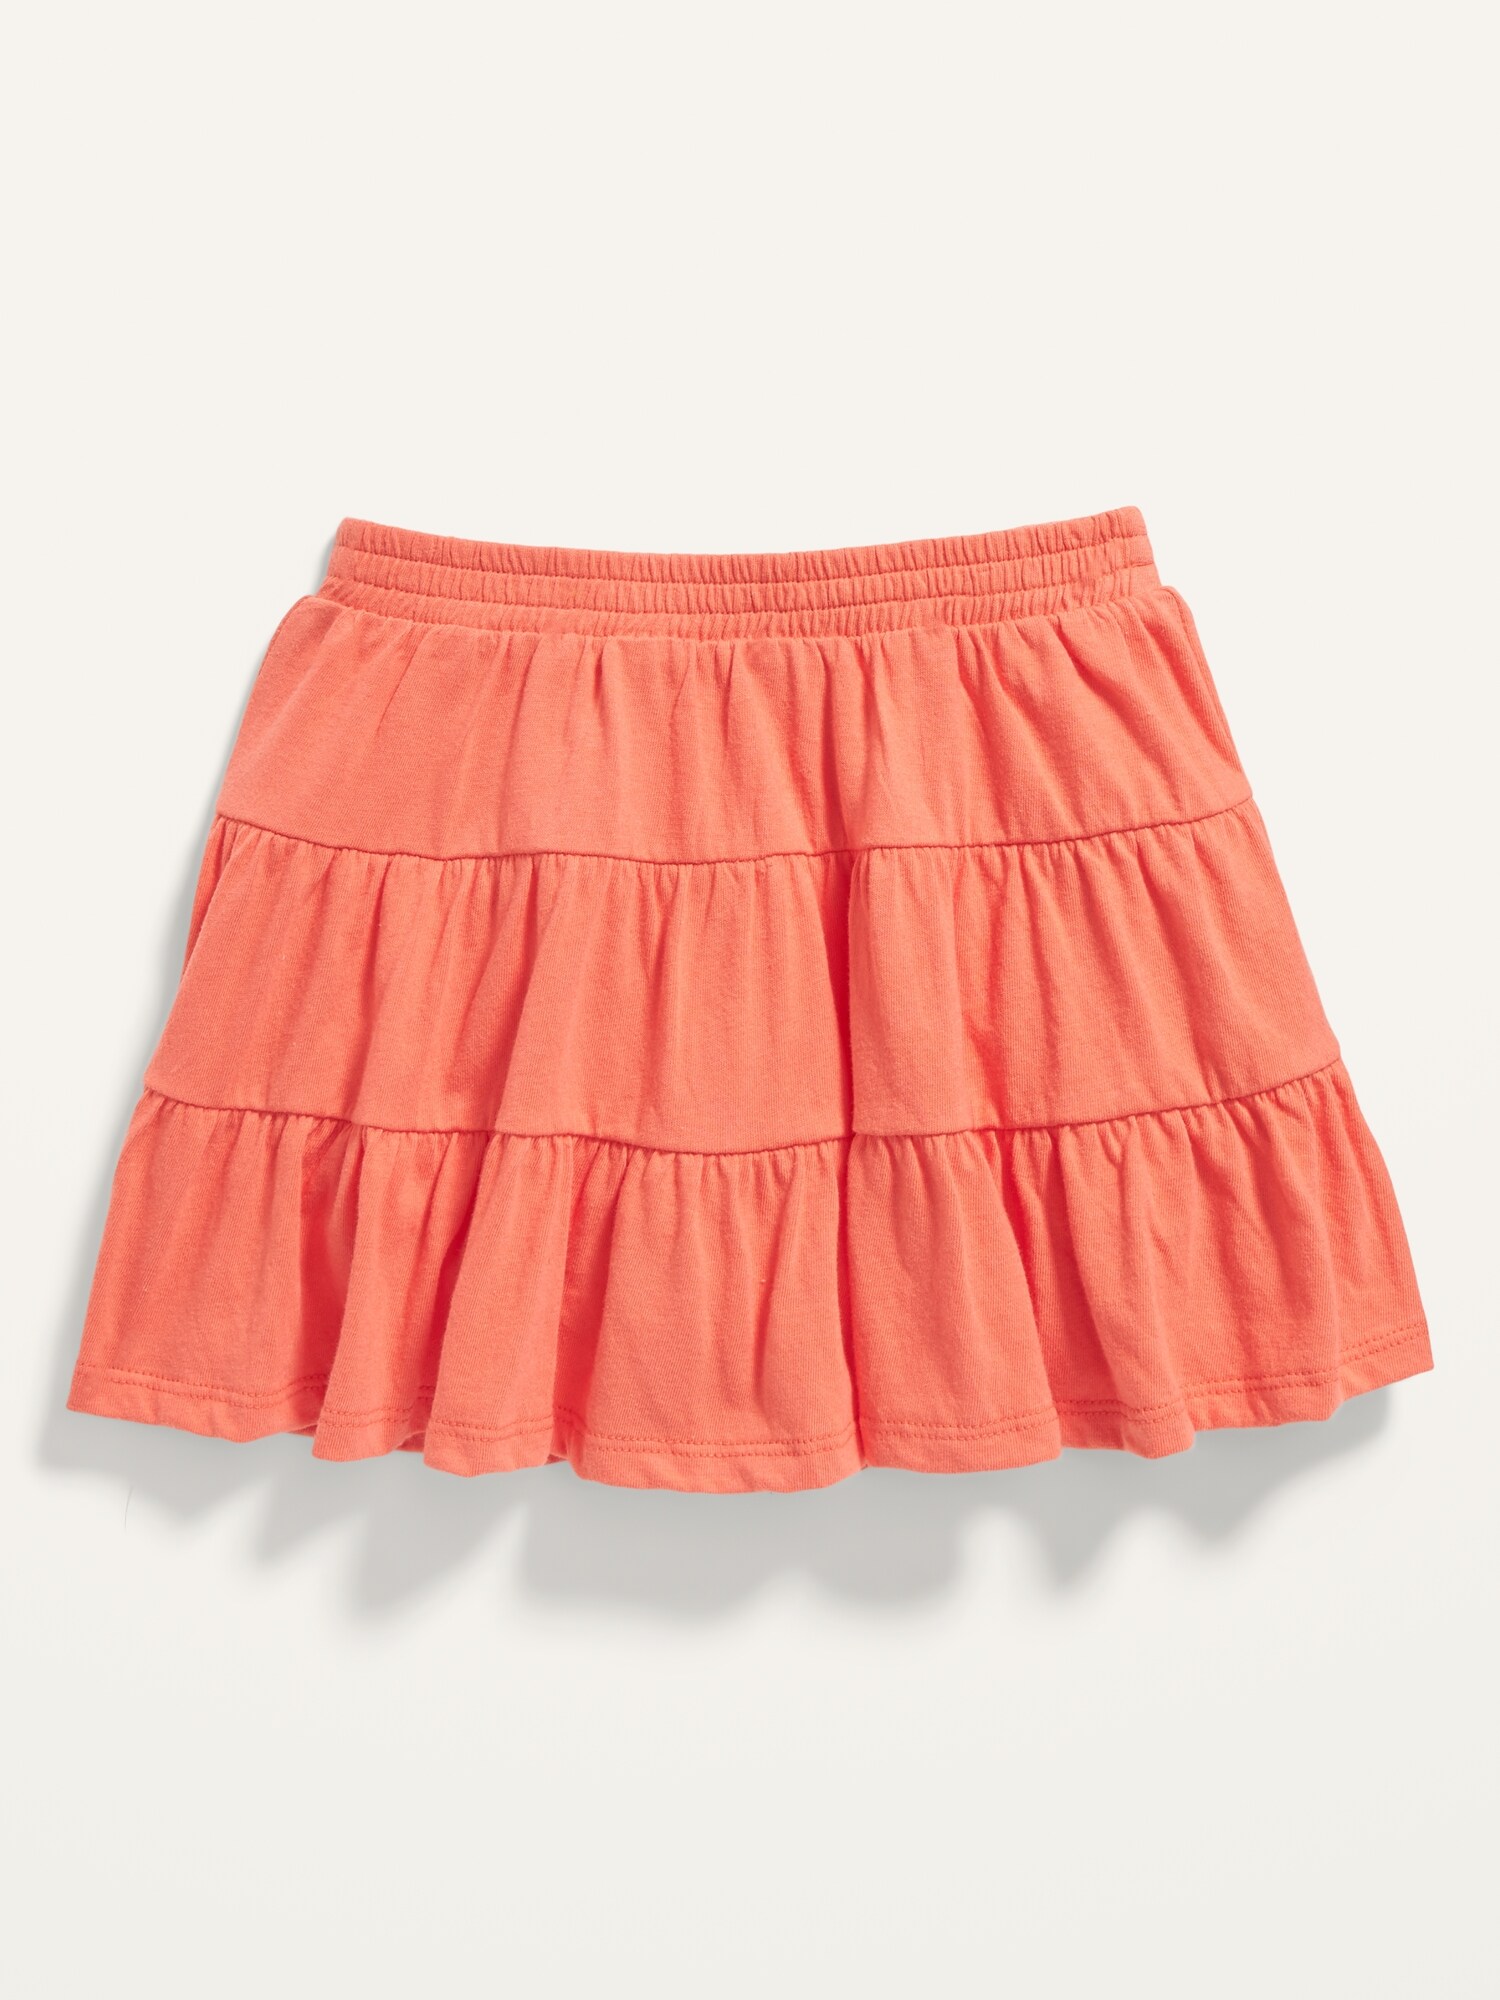 Tiered Jersey Pull-On Skort for Toddler Girls